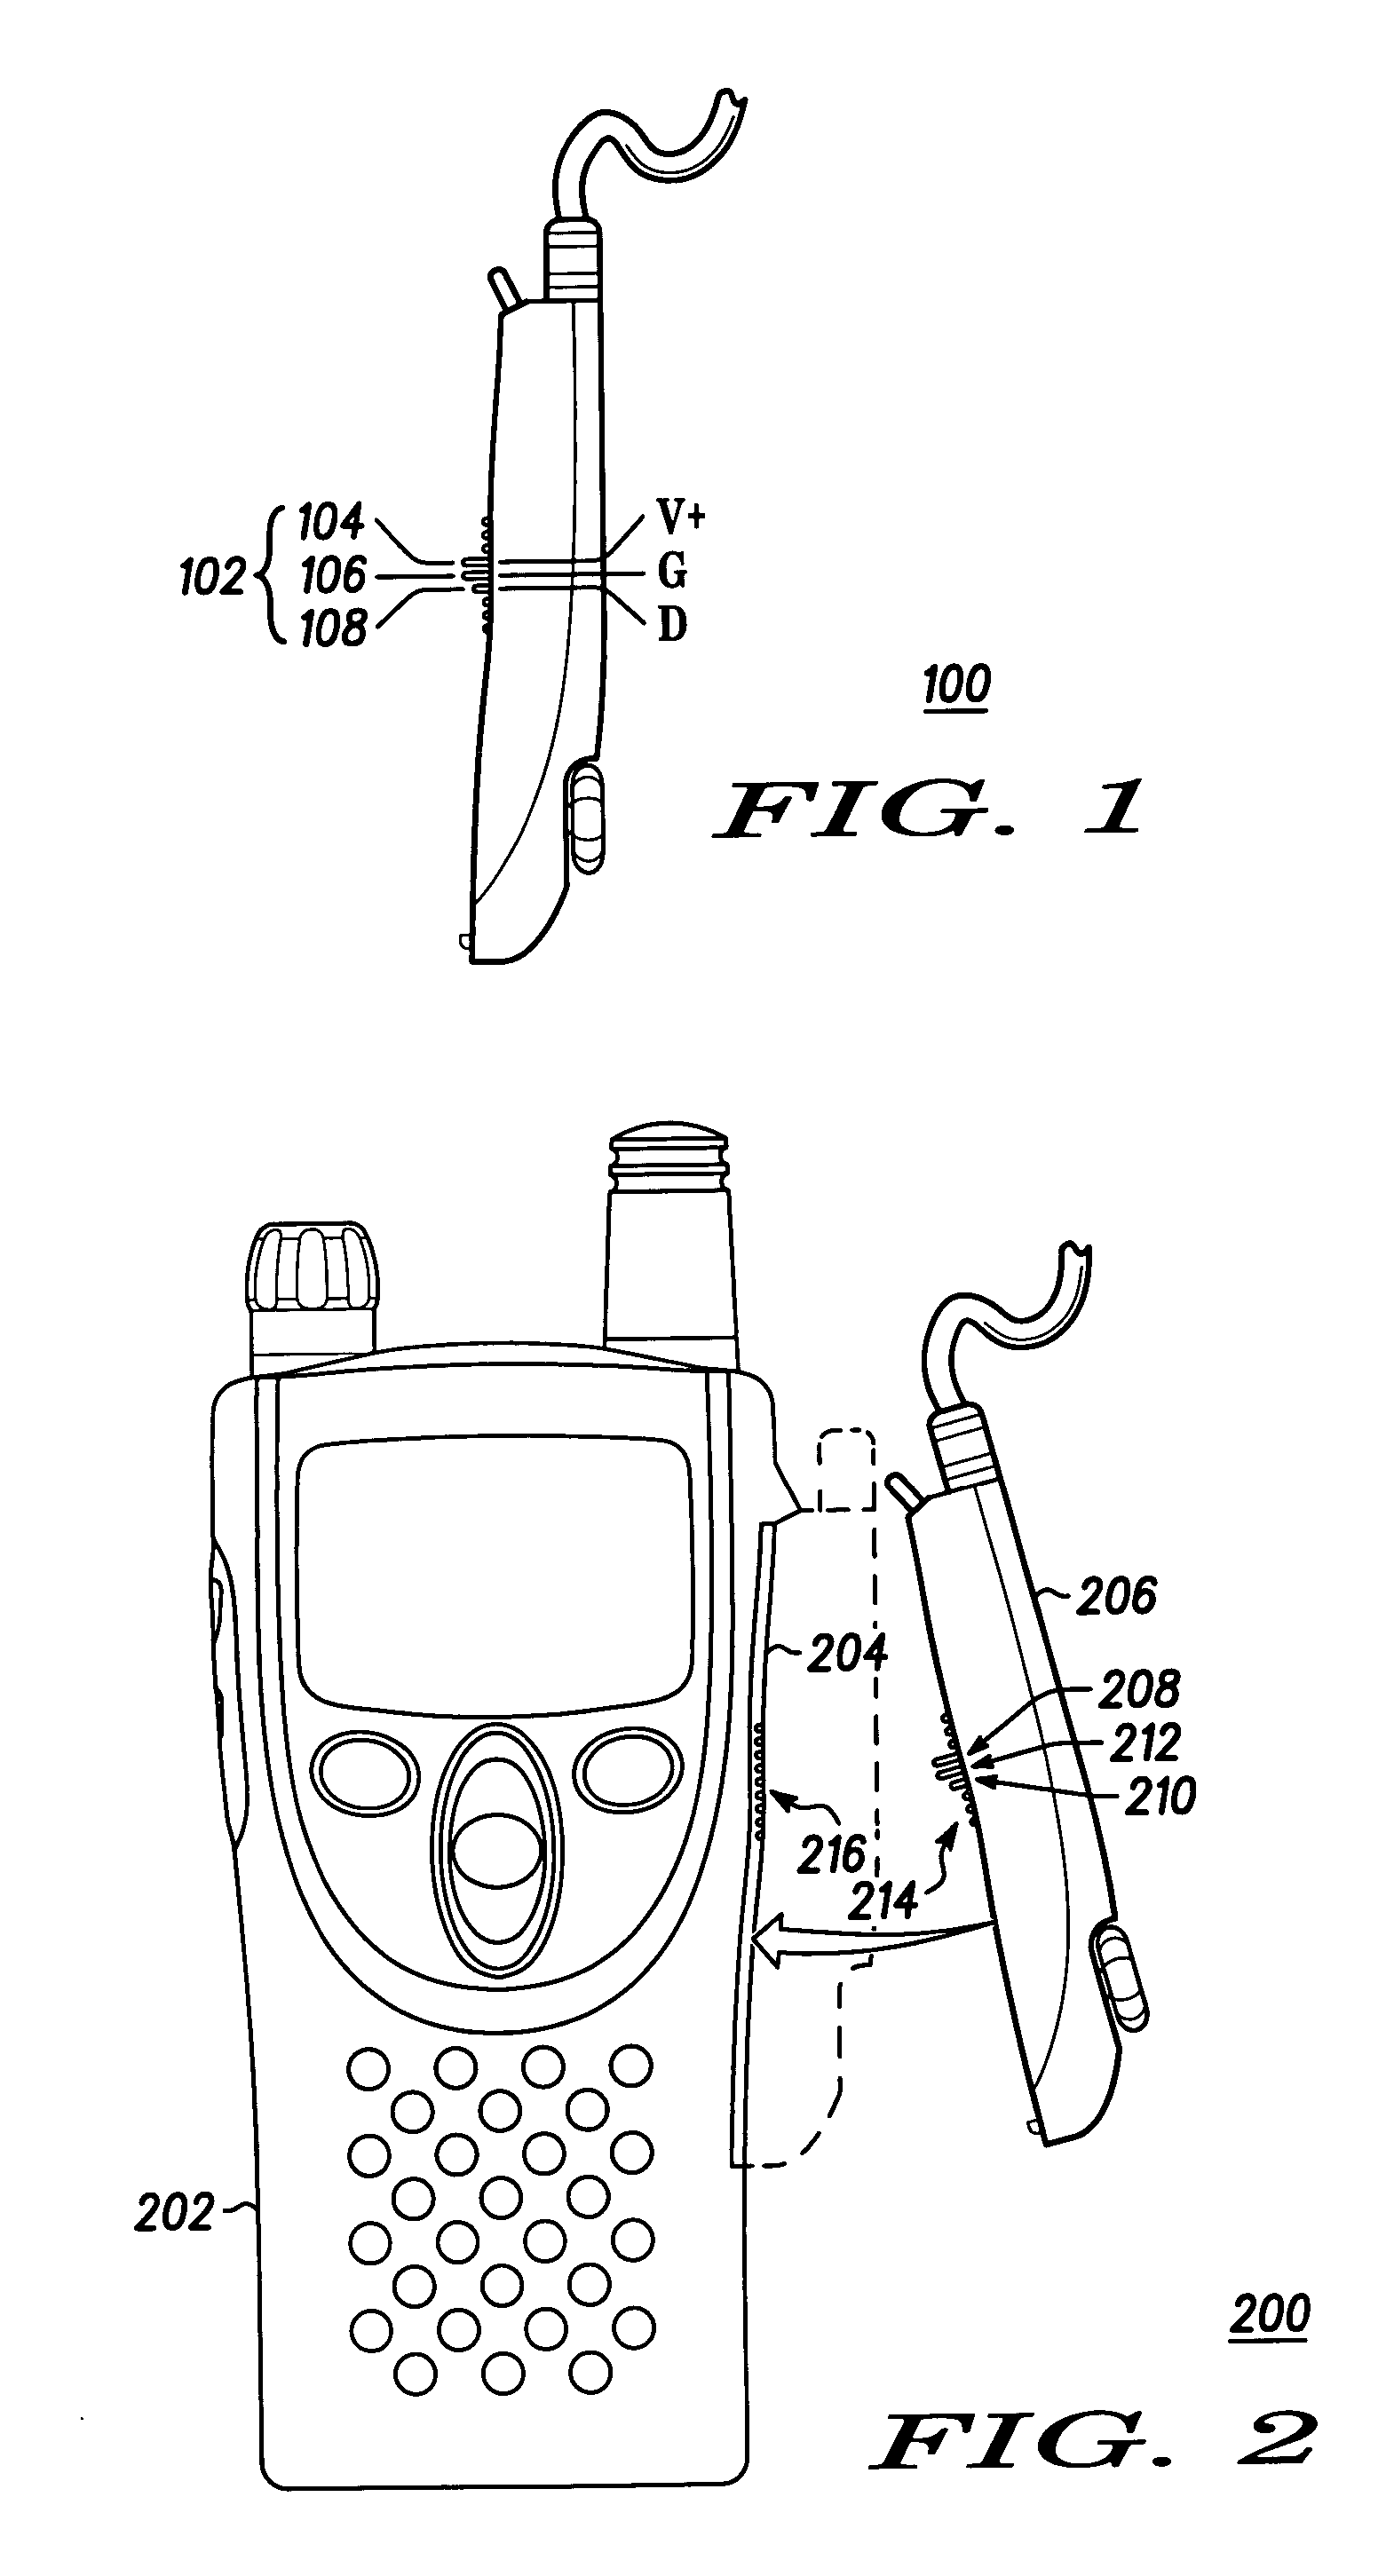 Apparatus for intrinsically safe power interface